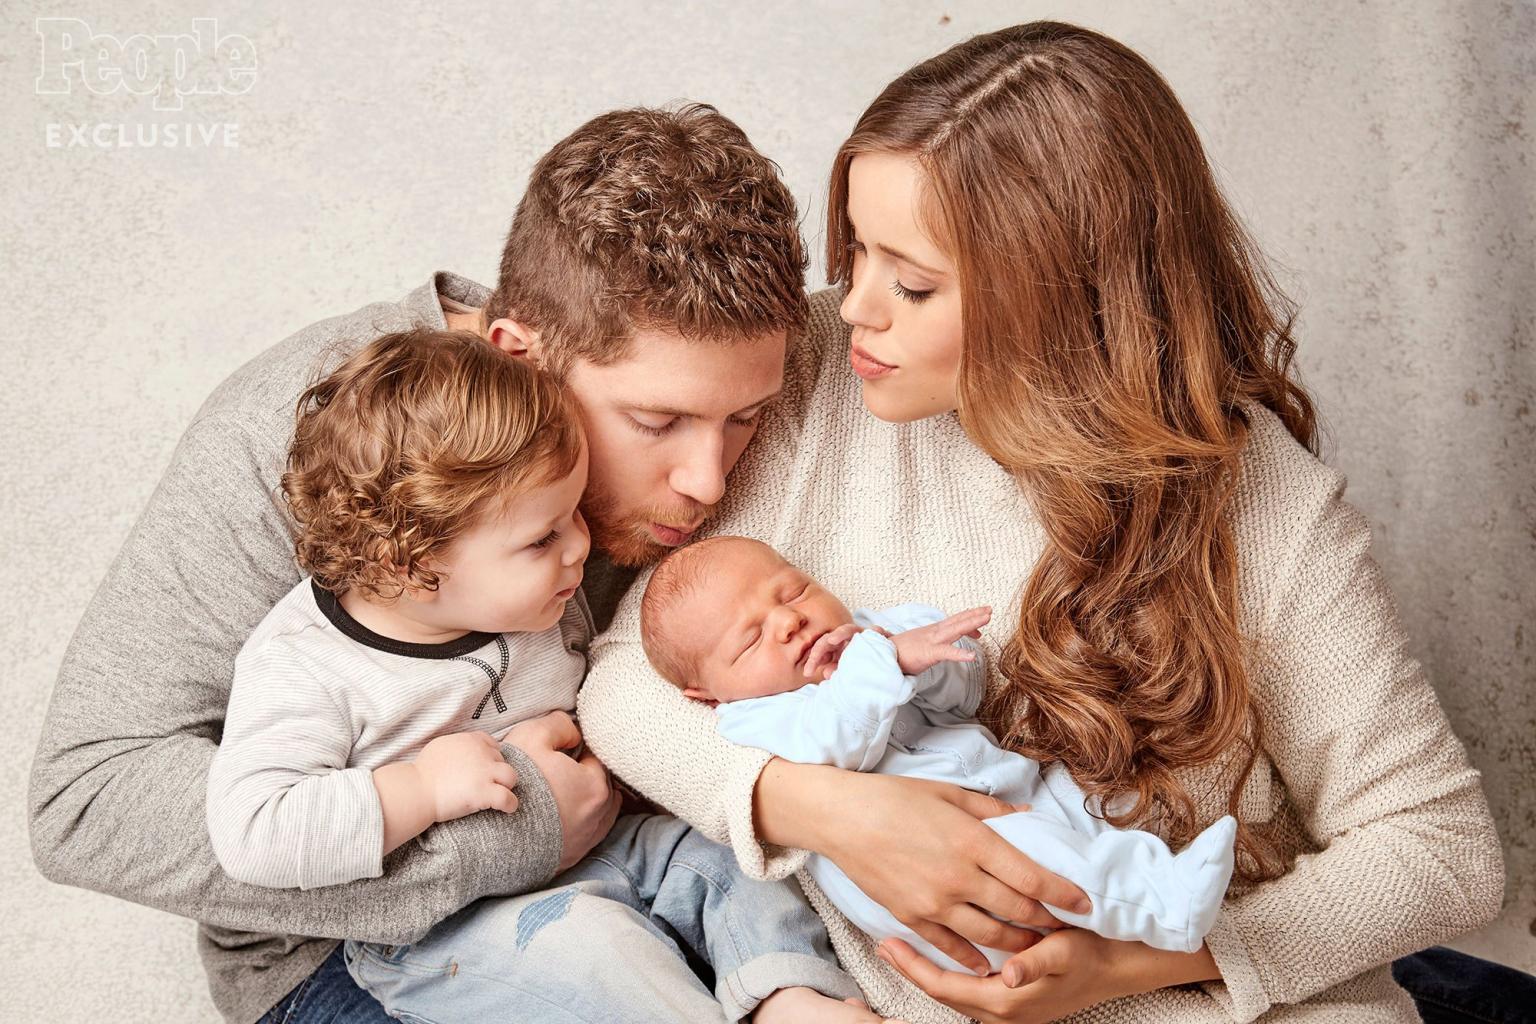 Jessa Duggar Seewald Shares Adorable Snaps of 1-Year-Old        Spurgeon       's First    Haircut!        